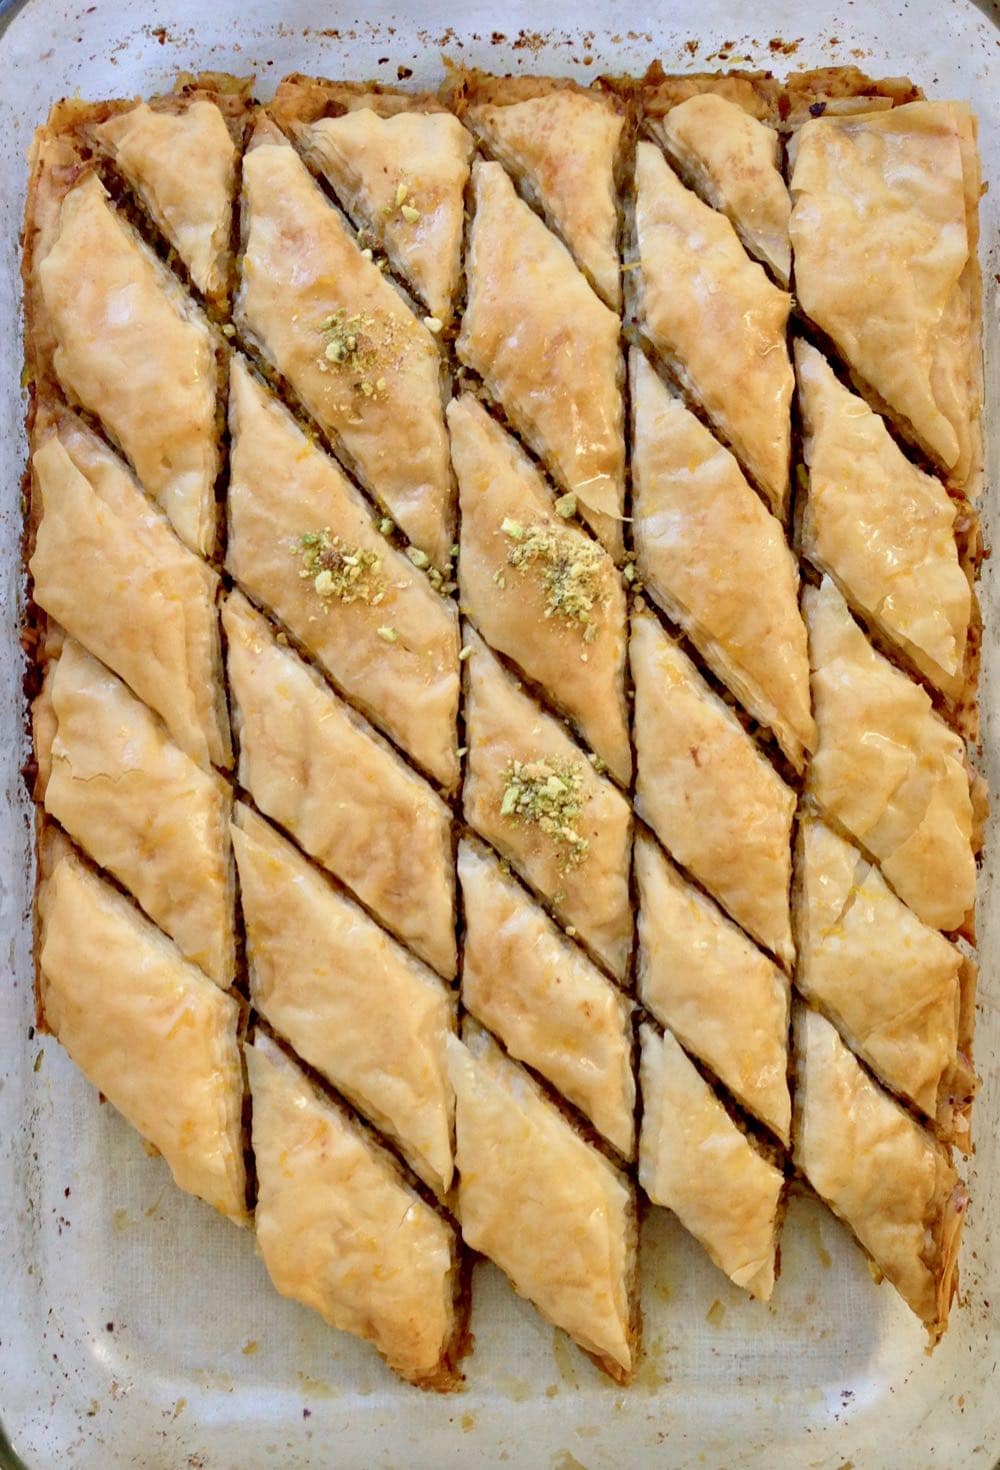 How to cut Baklava diamonds and squares